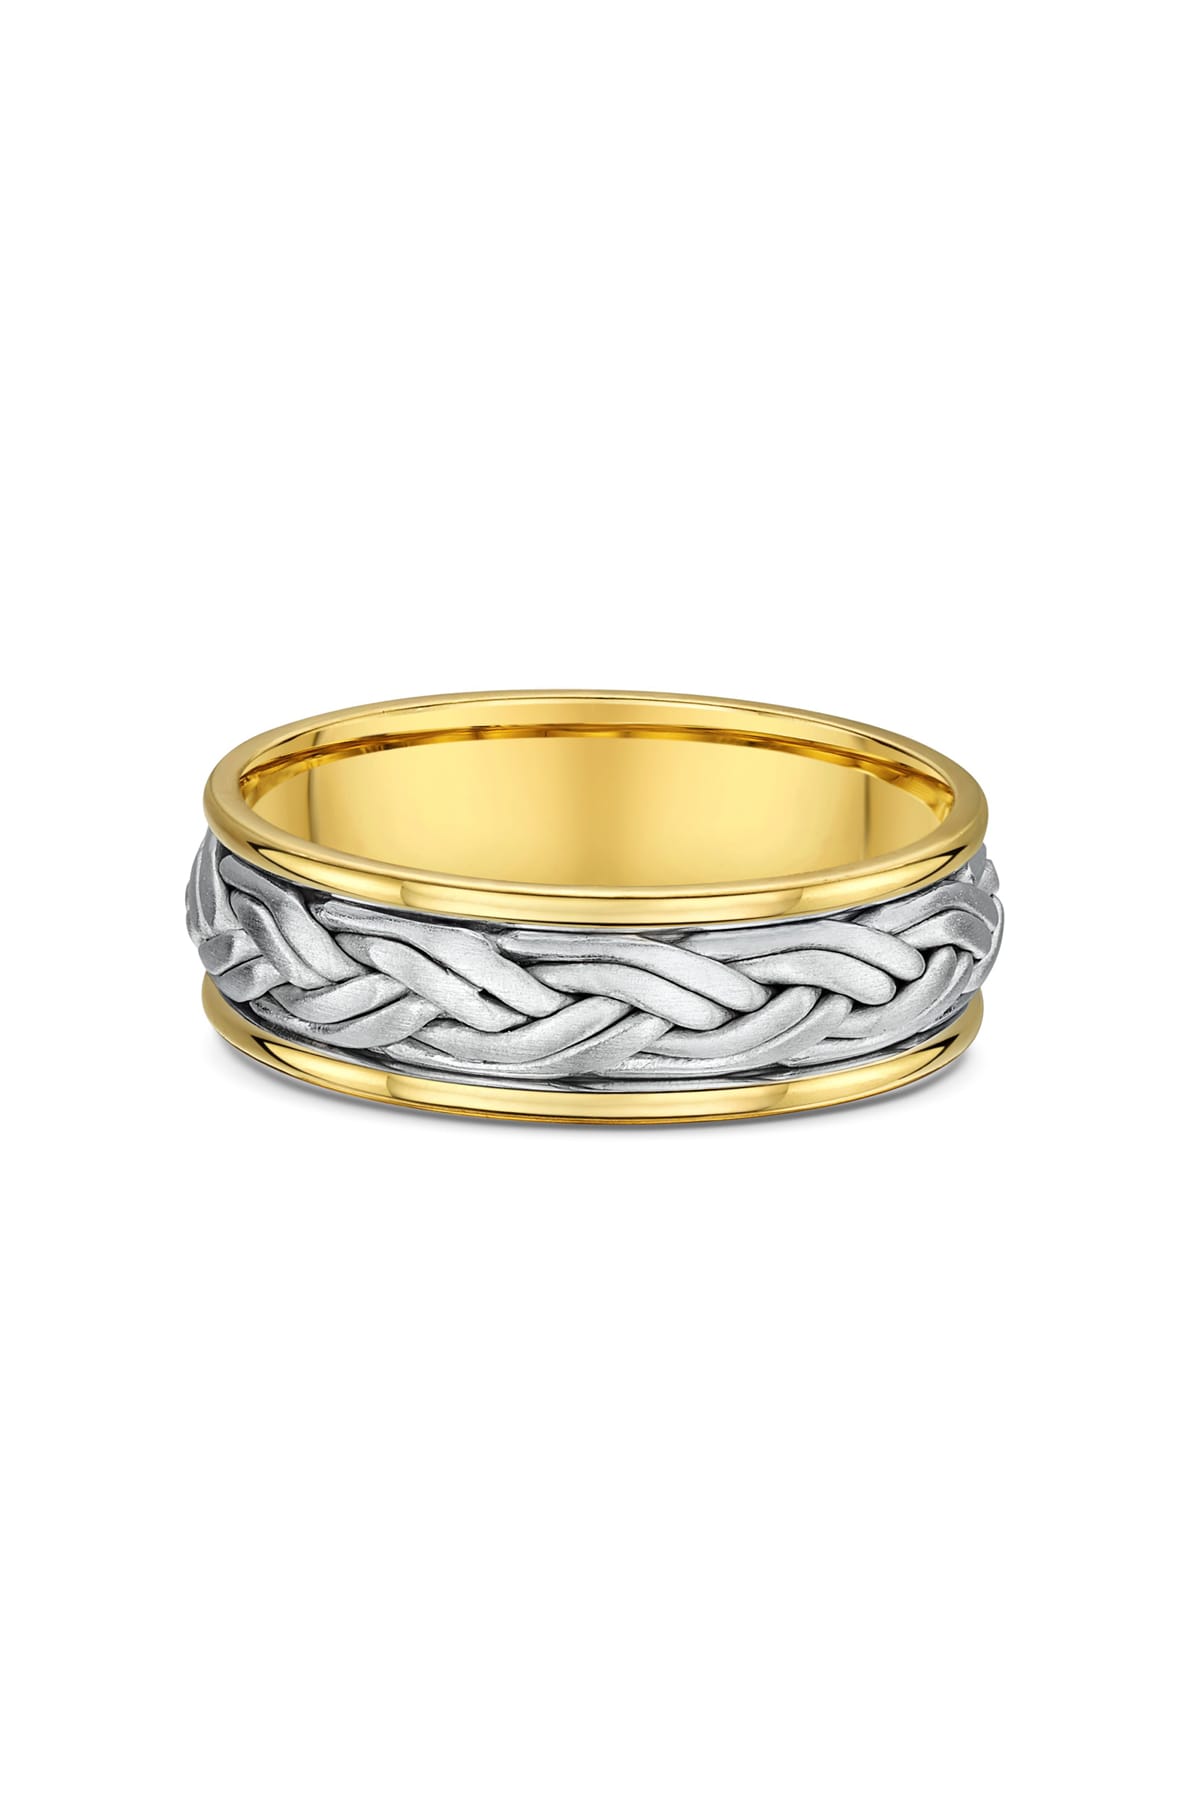 Men's Deluxe Gold Wedding Ring available at LeGassick Diamonds and Jewellery Gold Coast, Australia.